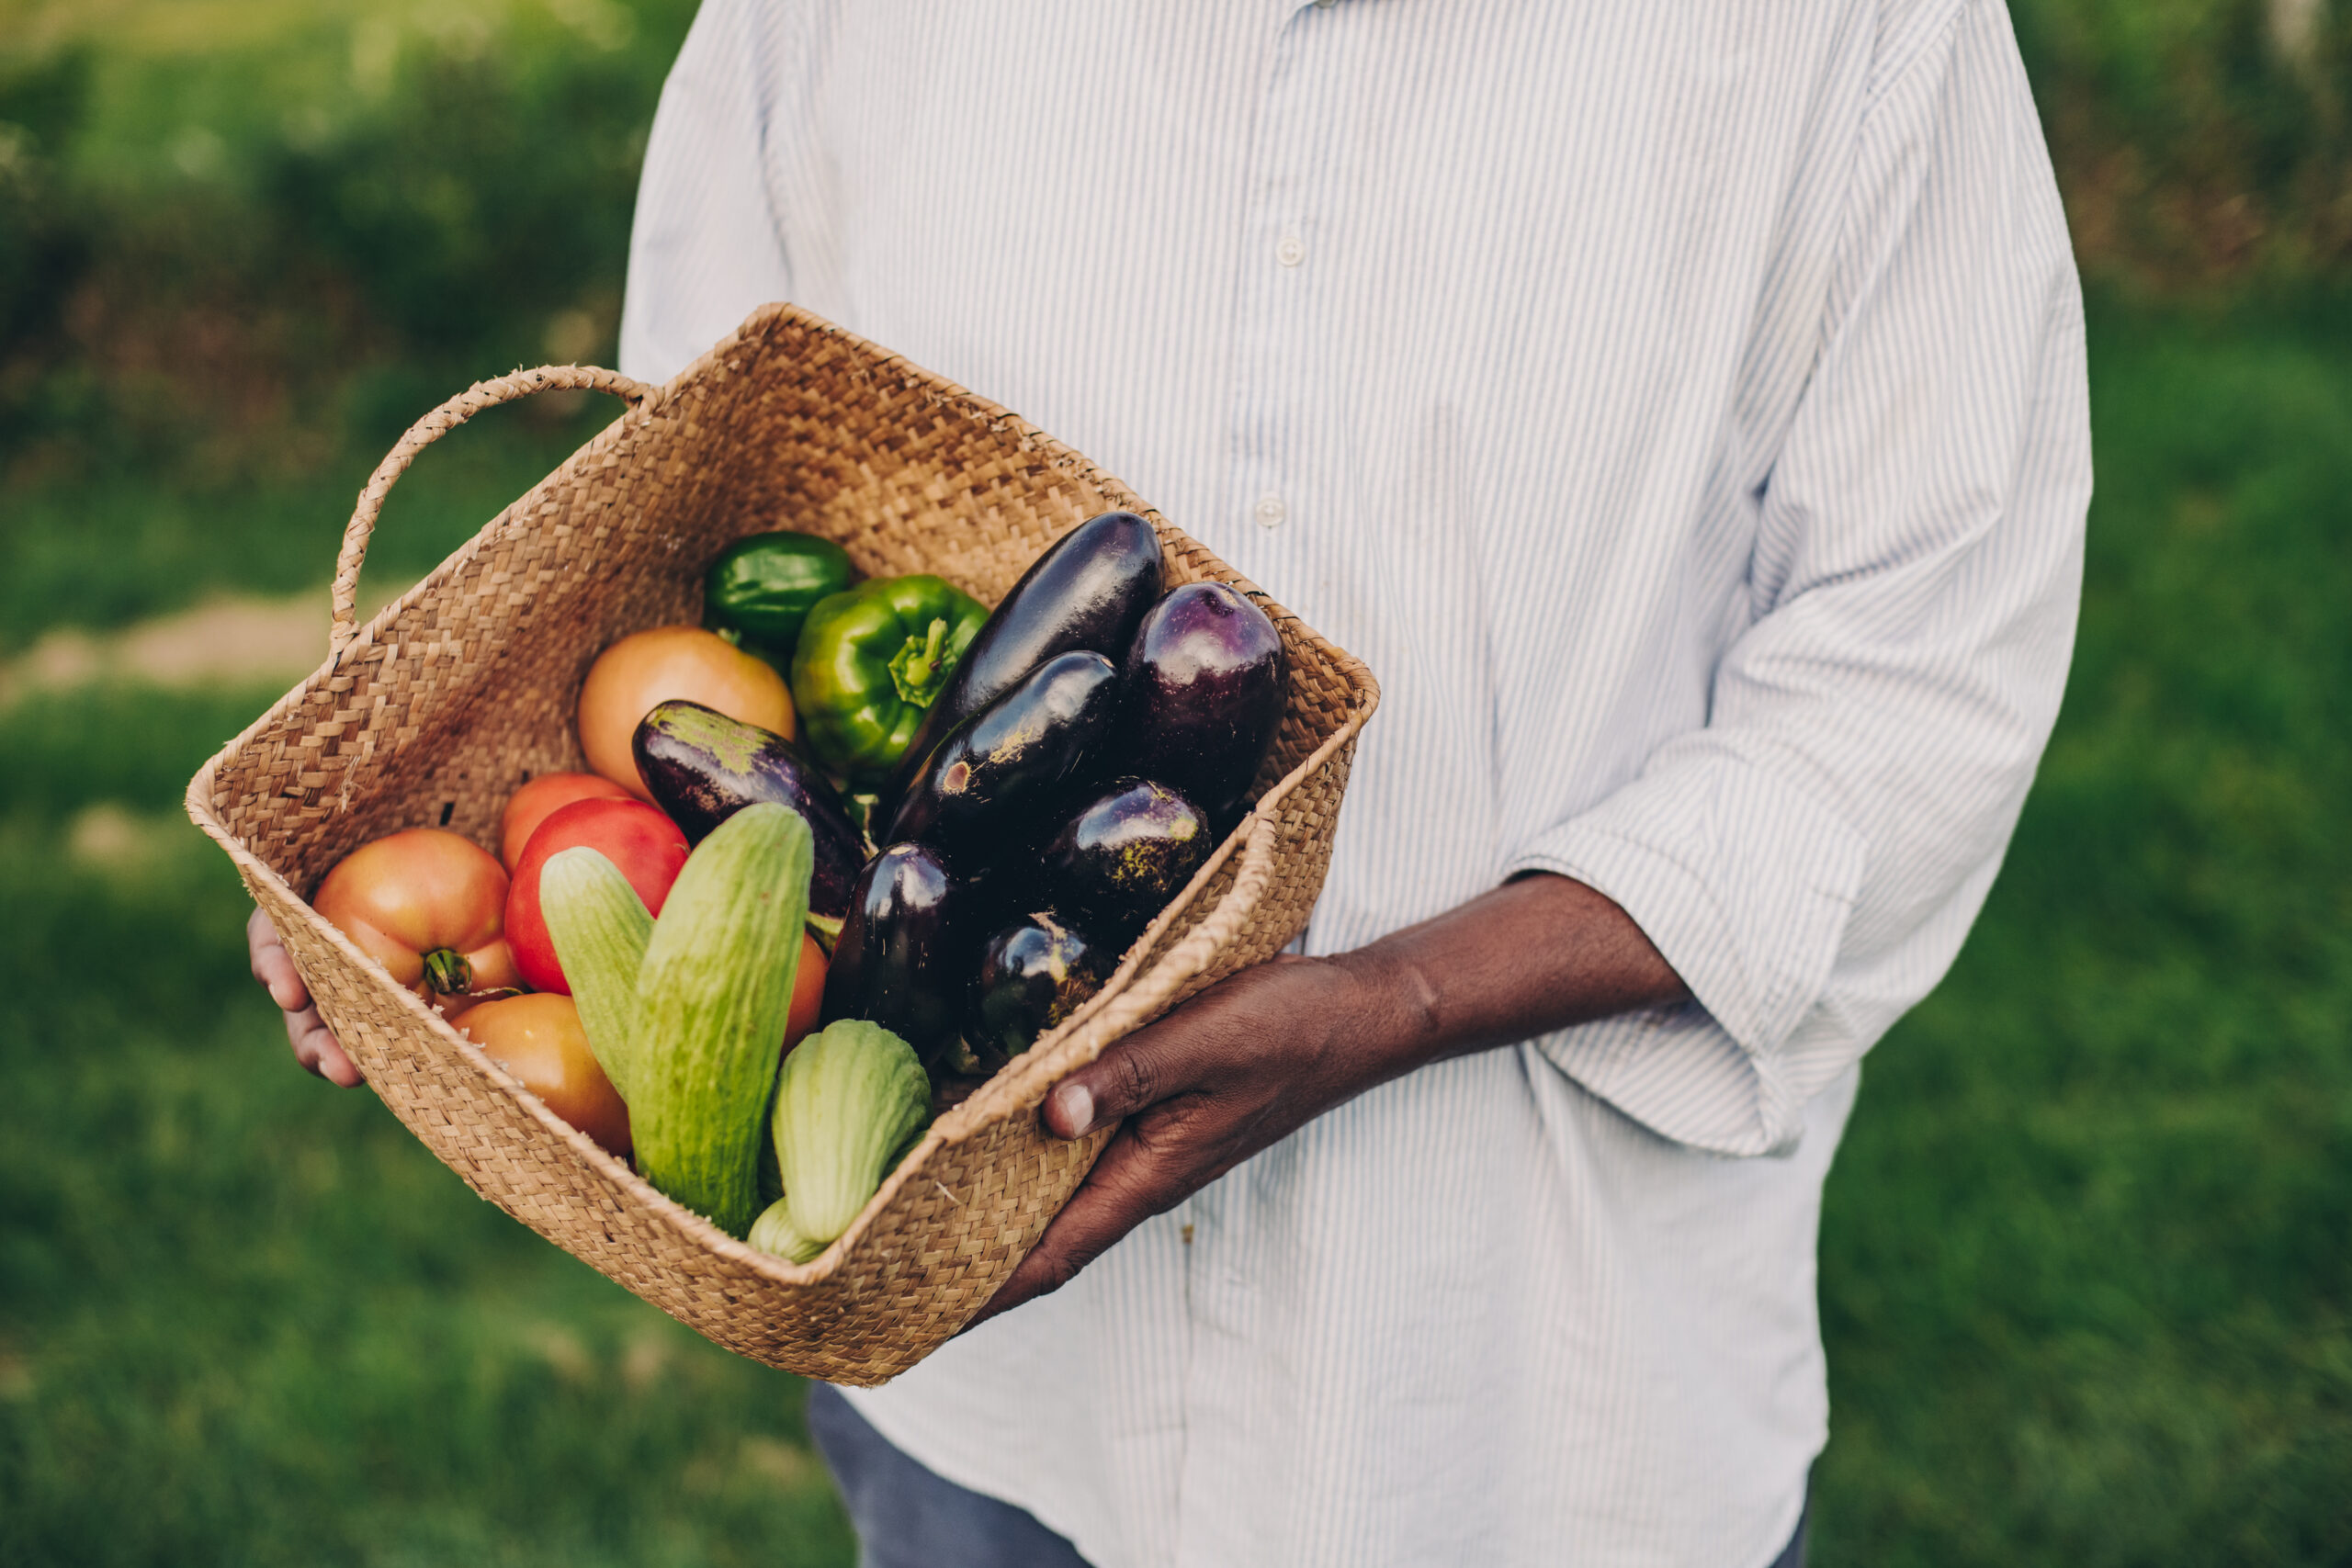 Someone holding a basket full of produce, including cucumbers, eggplants, peppers, and onions.